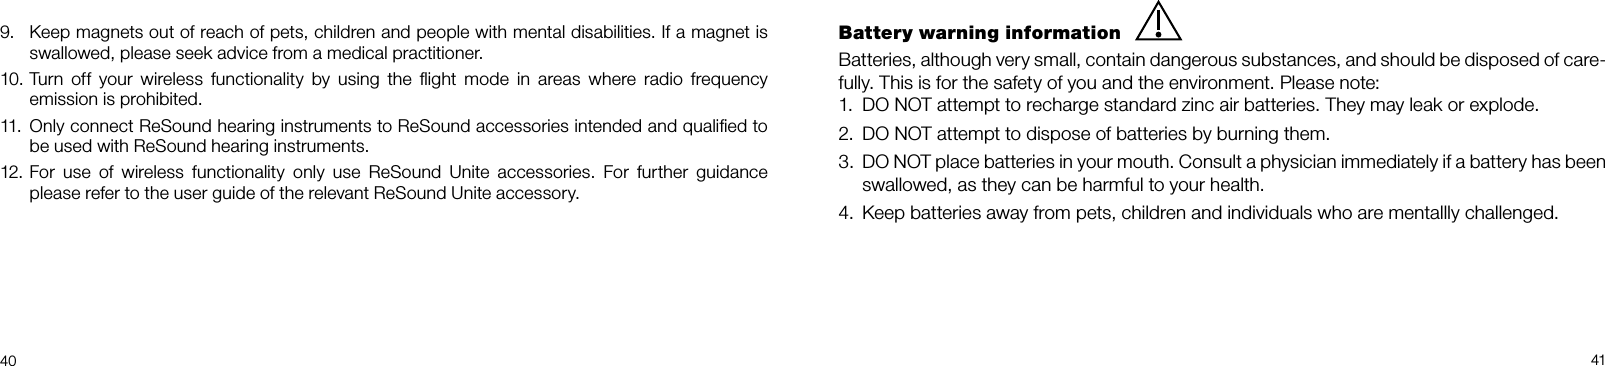  4041Battery warning informationBatteries, although very small, contain dangerous substances, and should be disposed of care-fully. This is for the safety of you and the environment. Please note: DO NOT attempt to recharge standard zinc air batteries. They may leak or explode.1. DO NOT attempt to dispose of batteries by burning them.2. DO NOT place batteries in your mouth. Consult a physician immediately if a battery has been 3. swallowed, as they can be harmful to your health.Keep batteries away from pets, children and individuals who are mentallly challenged.4. Keep magnets out of reach of pets, children and people with mental disabilities. If a magnet is 9.  swallowed, please seek advice from a medical practitioner.Turn  off  your  wireless  functionality  by  using  the  ﬂight  mode  in  areas  where  radio  frequency 10. emission is prohibited.Only connect ReSound hearing instruments to ReSound accessories intended and qualiﬁed to 11.  be used with ReSound hearing instruments.For  use  of  wireless  functionality  only  use  ReSound  Unite  accessories.  For  further  guidance 12.  please refer to the user guide of the relevant ReSound Unite accessory.